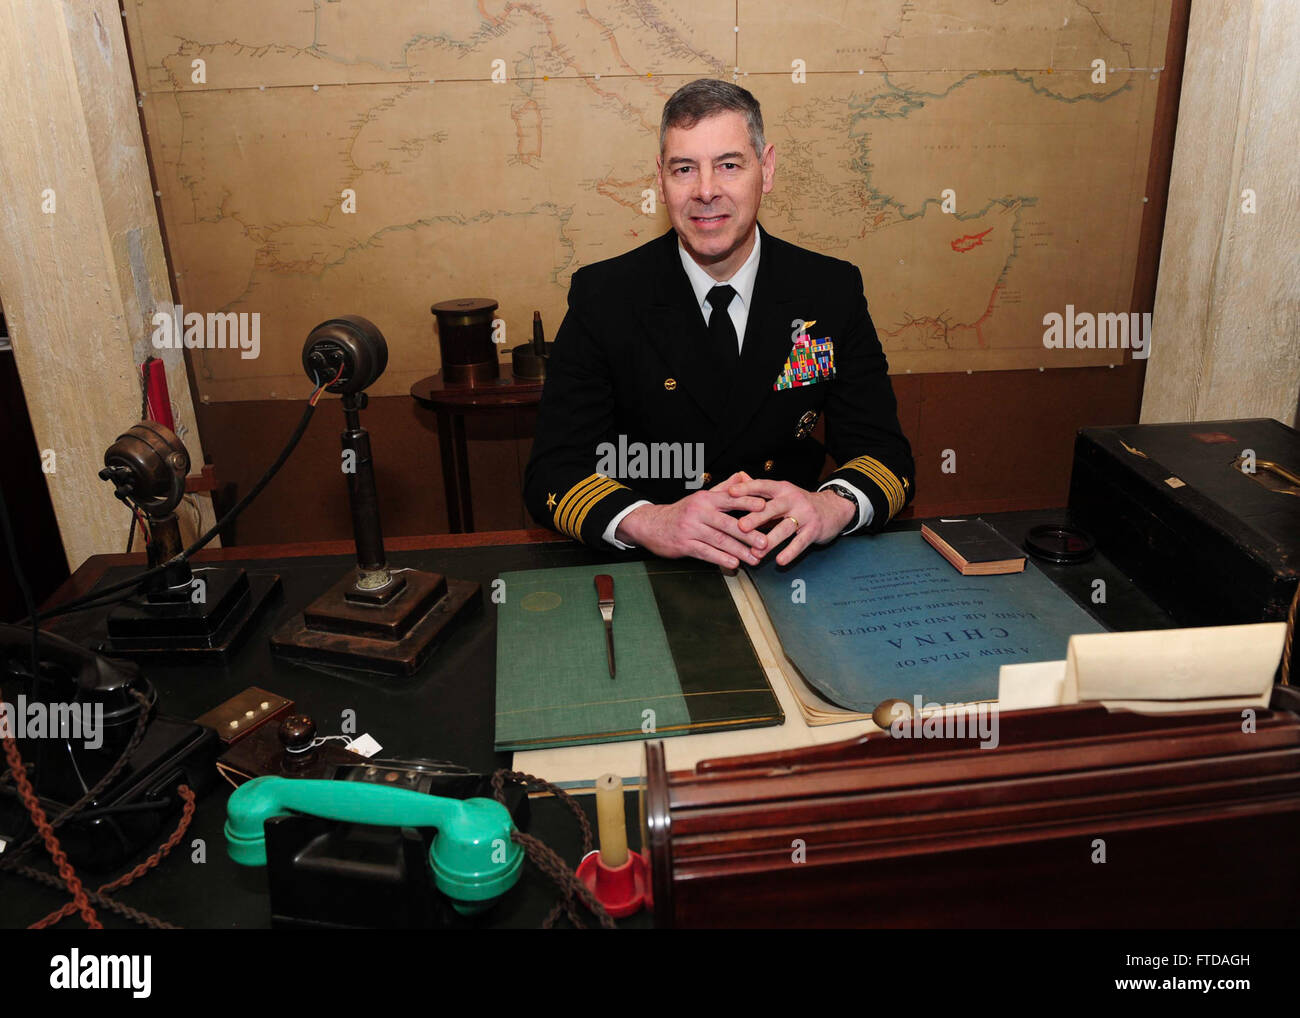 150324-N-BD333-093 PORTSMOUTH, United Kingdom (March 24, 2015) Capt. Daniel Grieco, commanding officer aboard the aircraft carrier USS Theodore Roosevelt (CVN 71) sits in Sir Winston S. Churchill’s chair in his office-bedroom during a tour of the Churchill War Rooms museum in London, March 24, 2015. Theodore Roosevelt Carrier Strike Group (TRCSG) leadership, including Cdr. Christine O'Connell, commanding officer of the Arleigh-Burke class guided missile destroyer USS Winston S. Churchill (DDG 81), attended the tour of the museum. Churchill, home-ported in Norfolk, is conducting naval operation Stock Photo